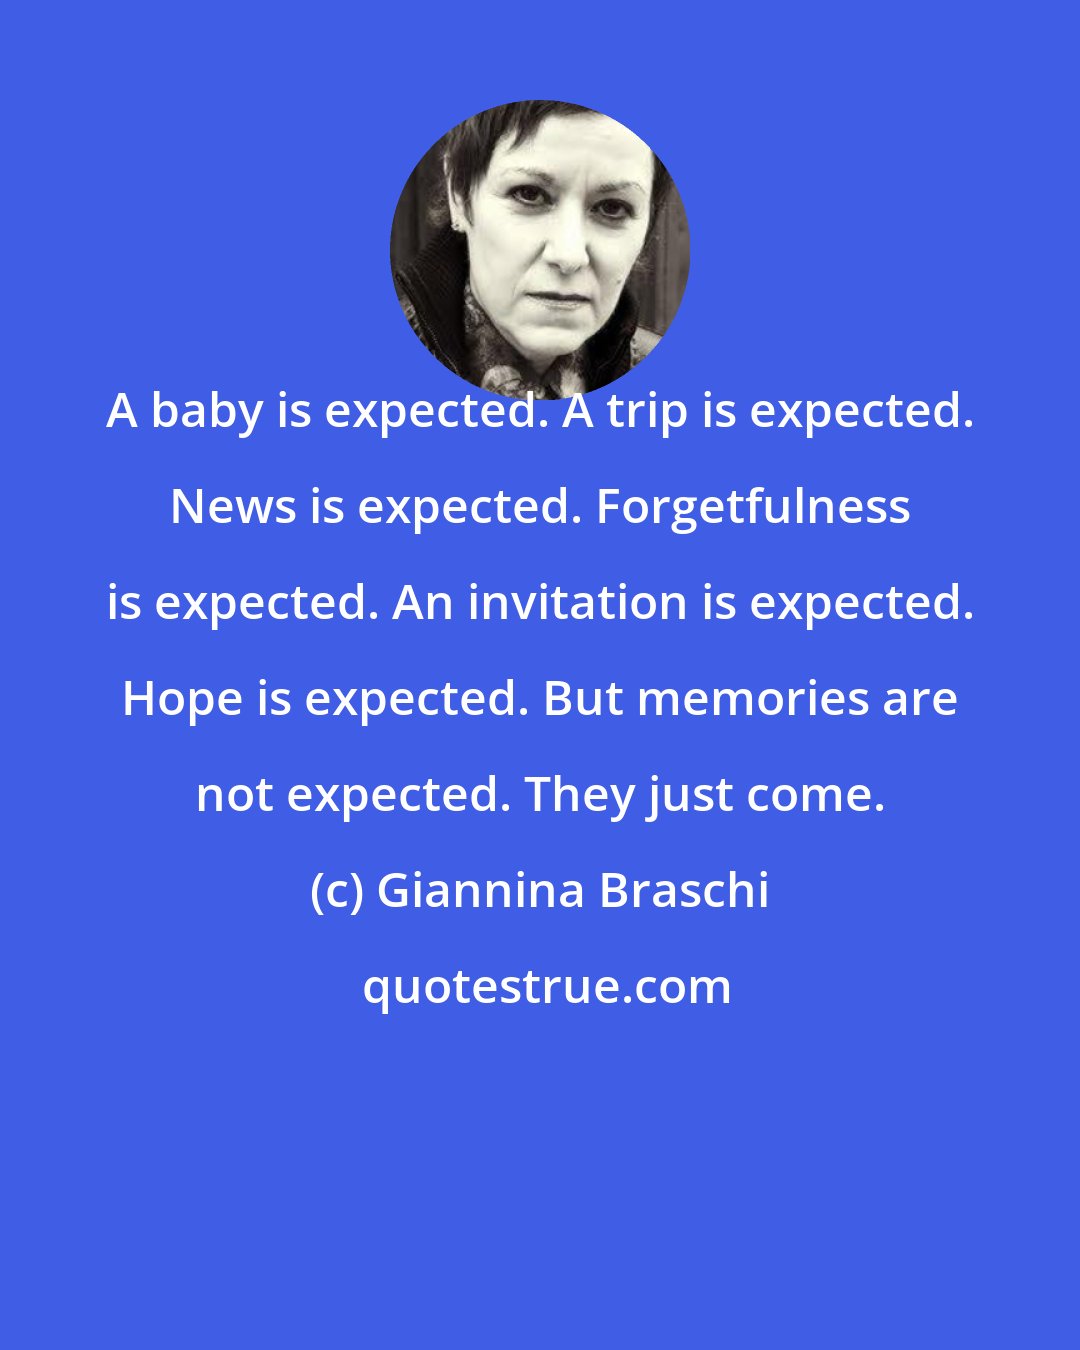 Giannina Braschi: A baby is expected. A trip is expected. News is expected. Forgetfulness is expected. An invitation is expected. Hope is expected. But memories are not expected. They just come.